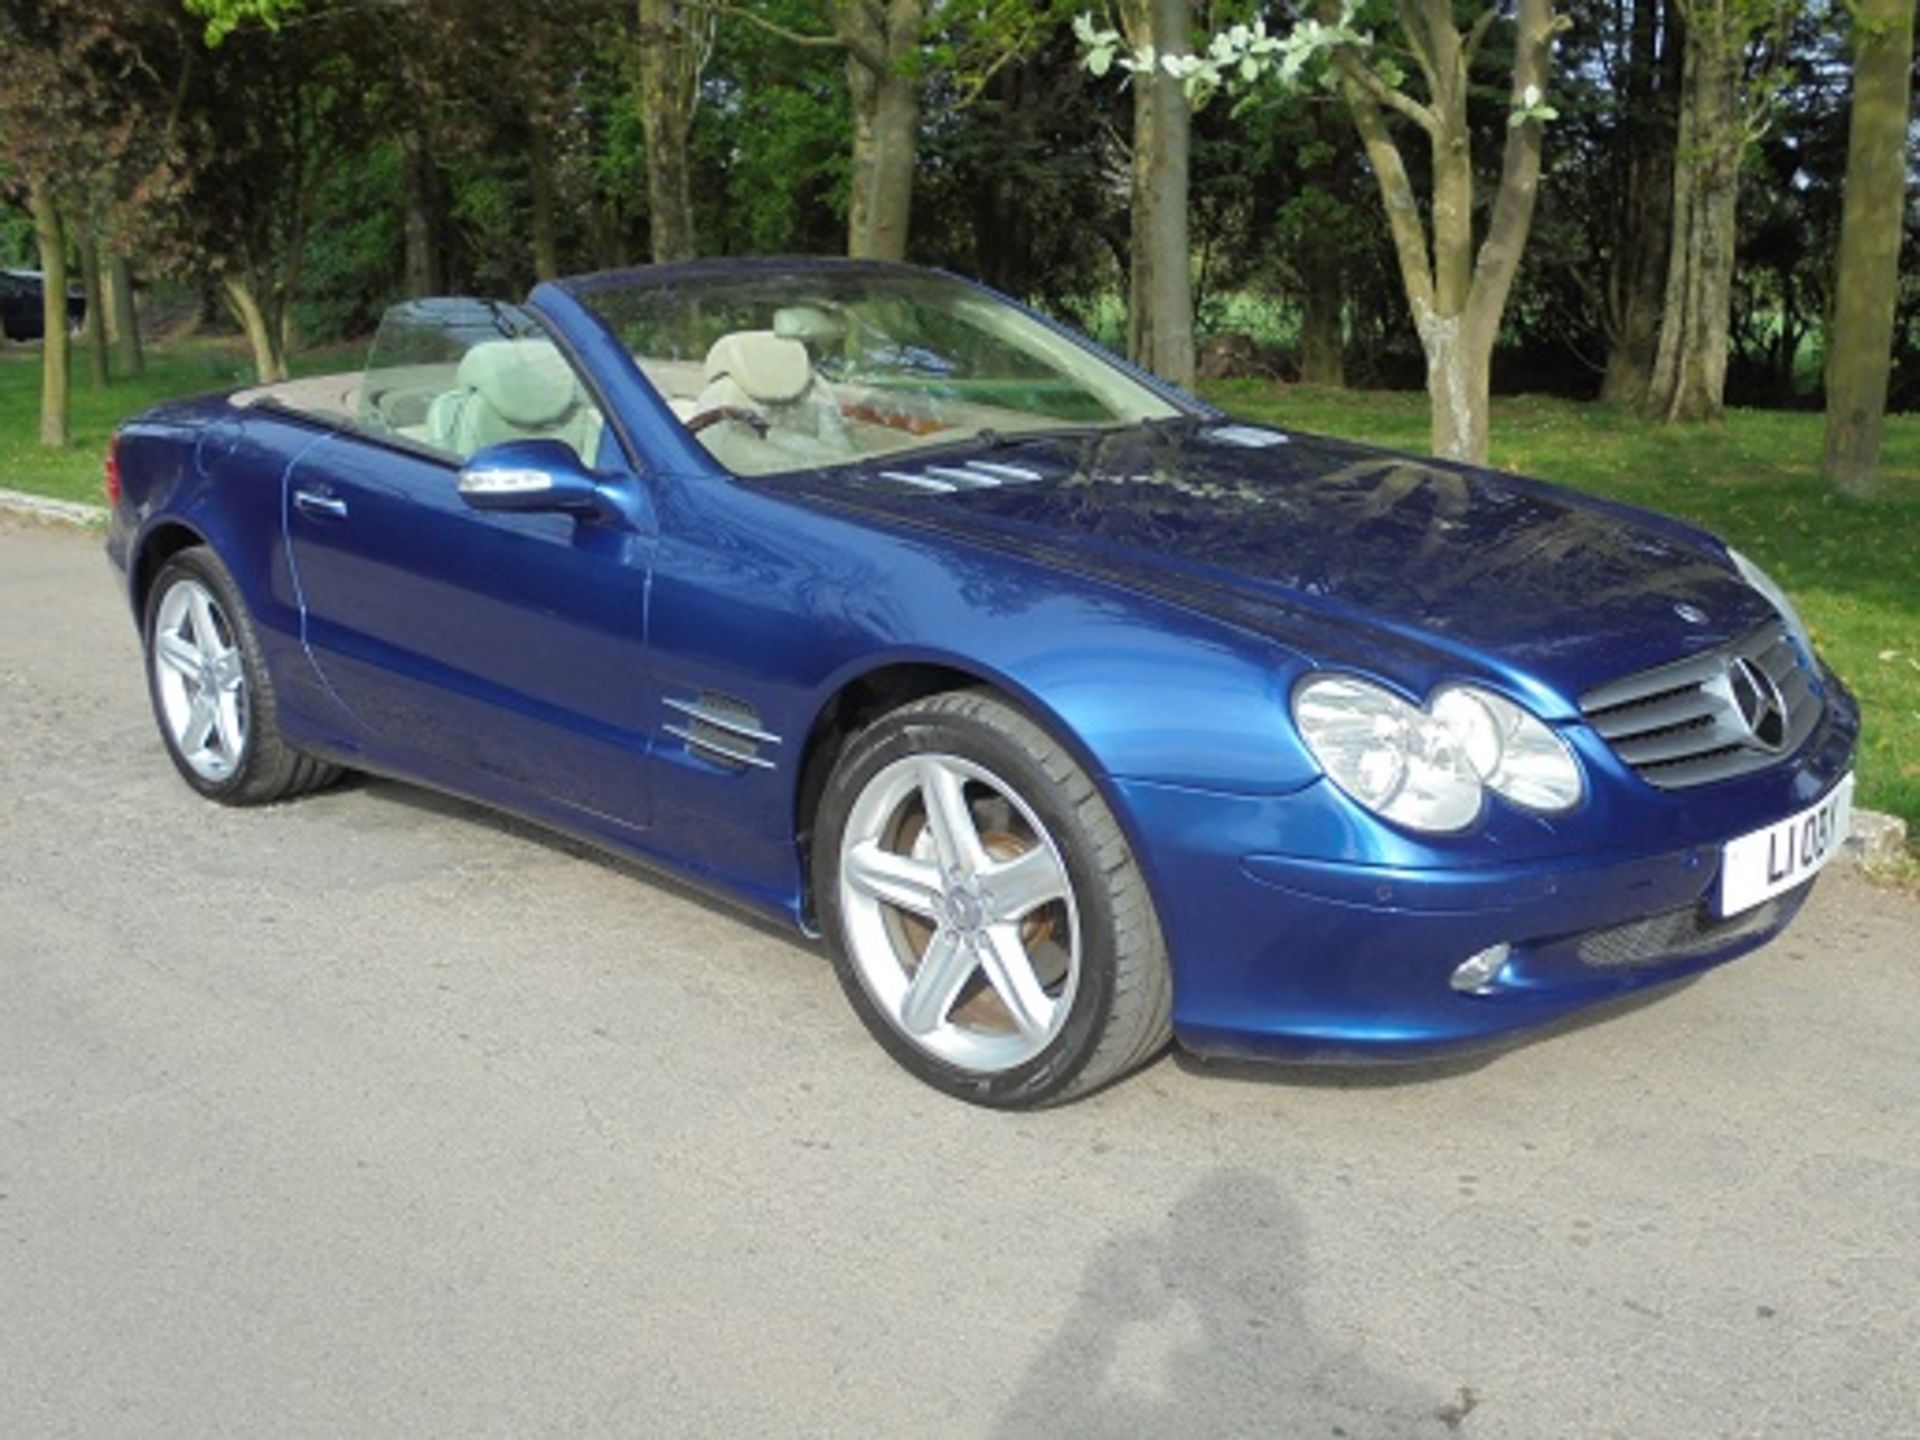 MERCEDES SL350 CONVERTIBLE WITH PRIVATE PLATE: L1OBY INCLUDED - Image 4 of 12